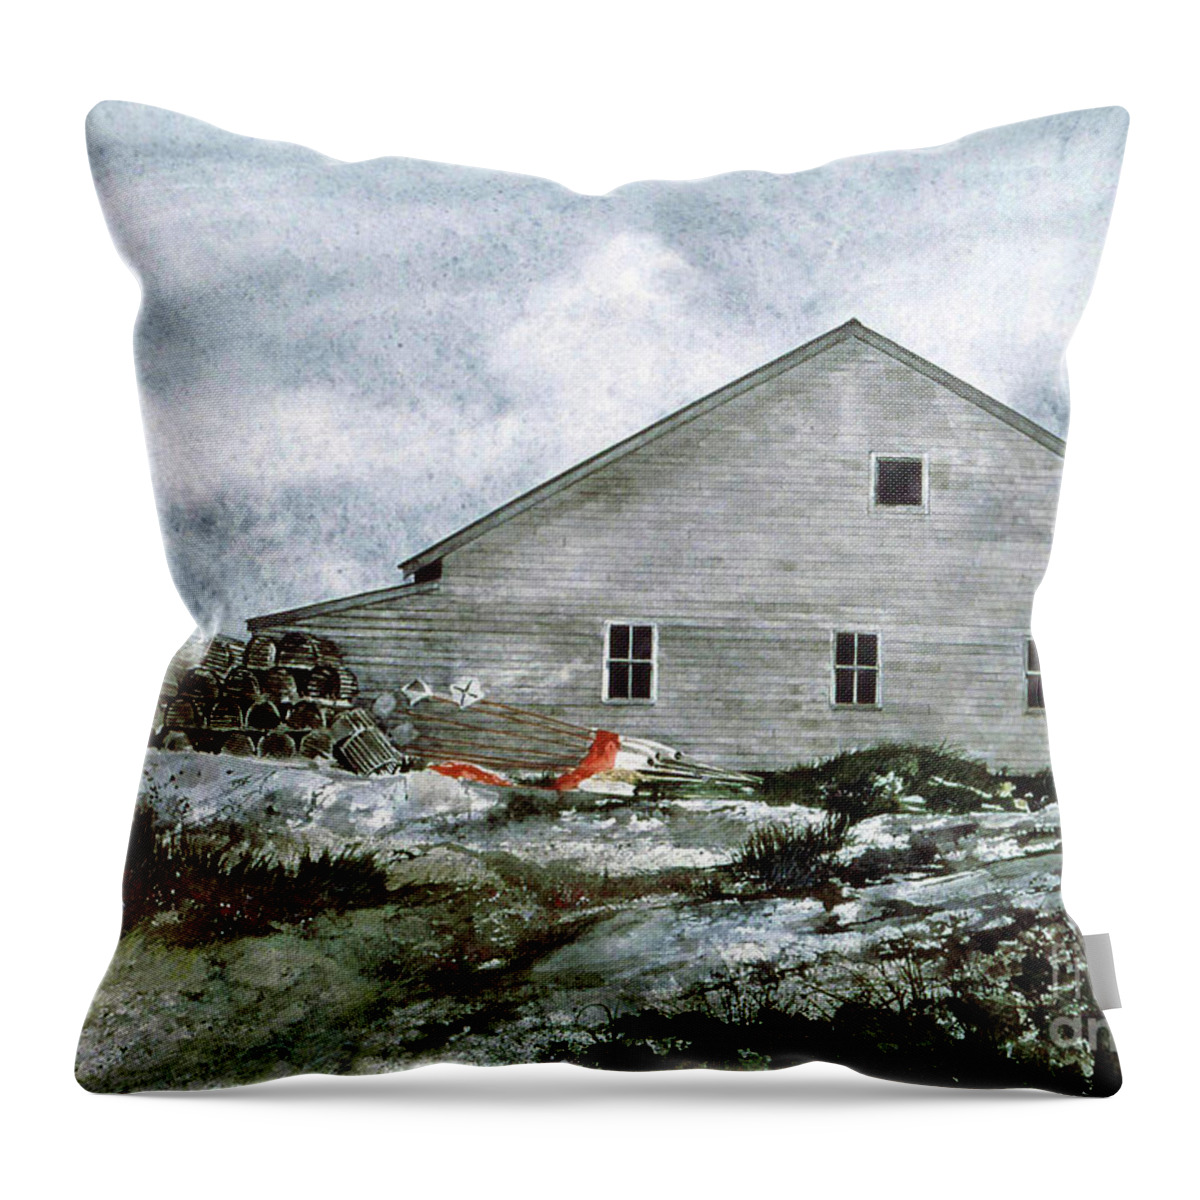 A Lobsterman's Building At Peggy's Cove Throw Pillow featuring the painting Lobsters by Monte Toon